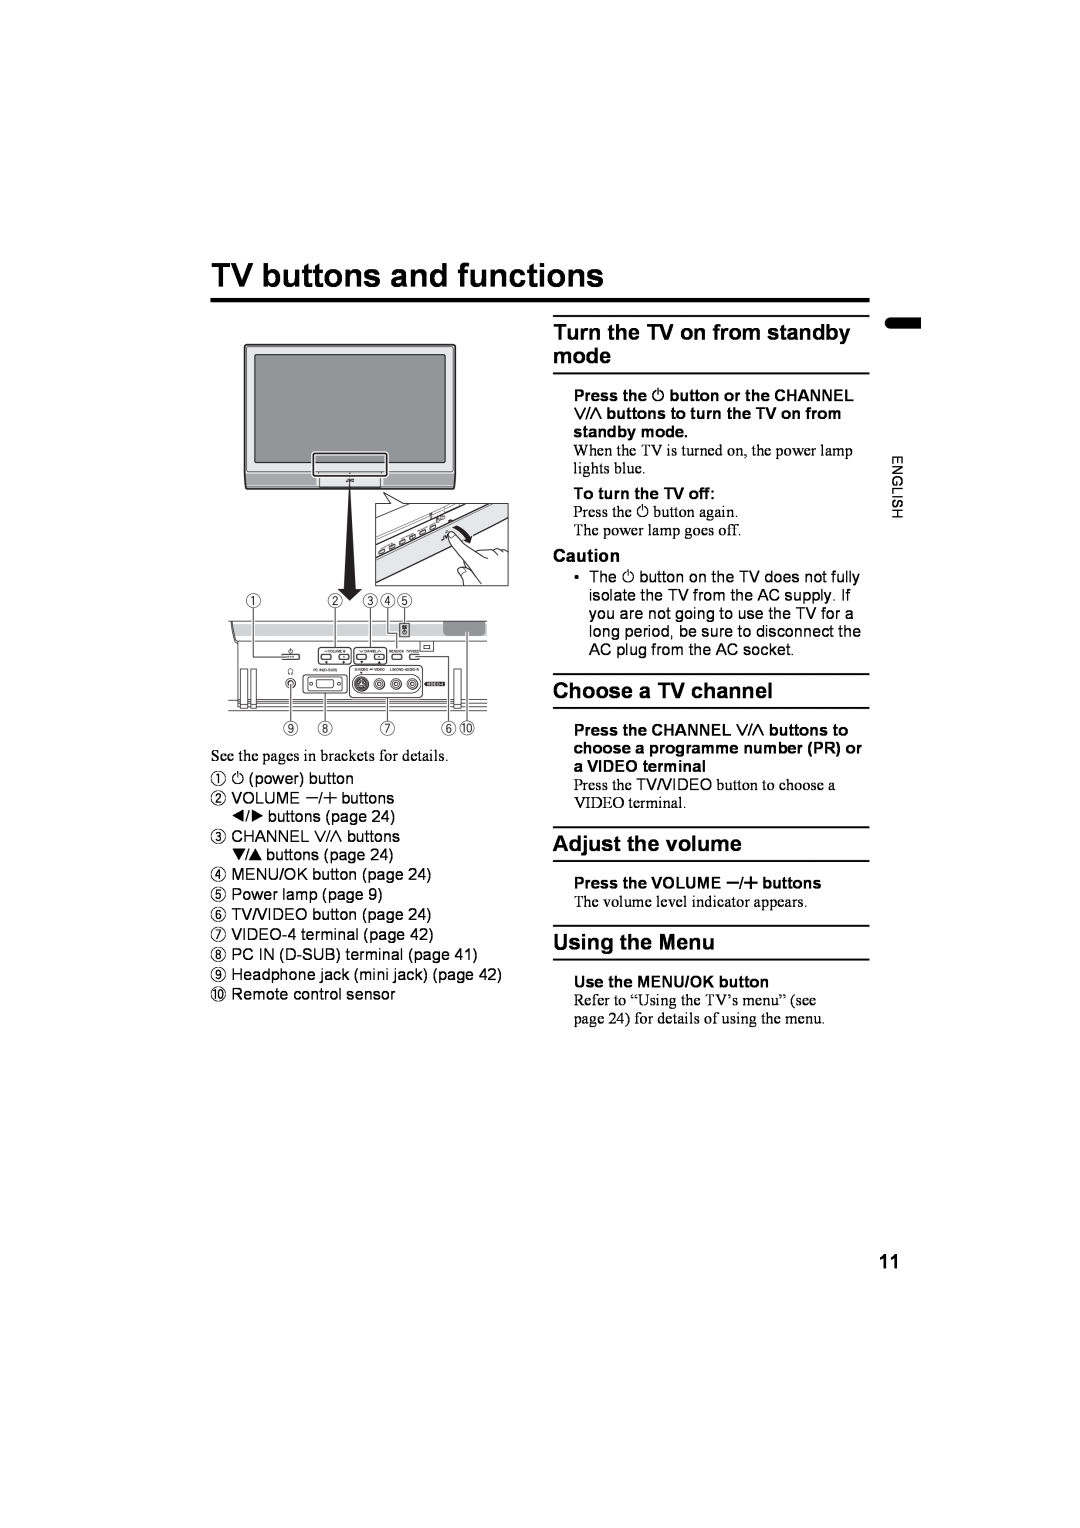 JVC LCT1774-001A manual TV buttons and functions, Turn the TV on from standby mode, Choose a TV channel, Adjust the volume 